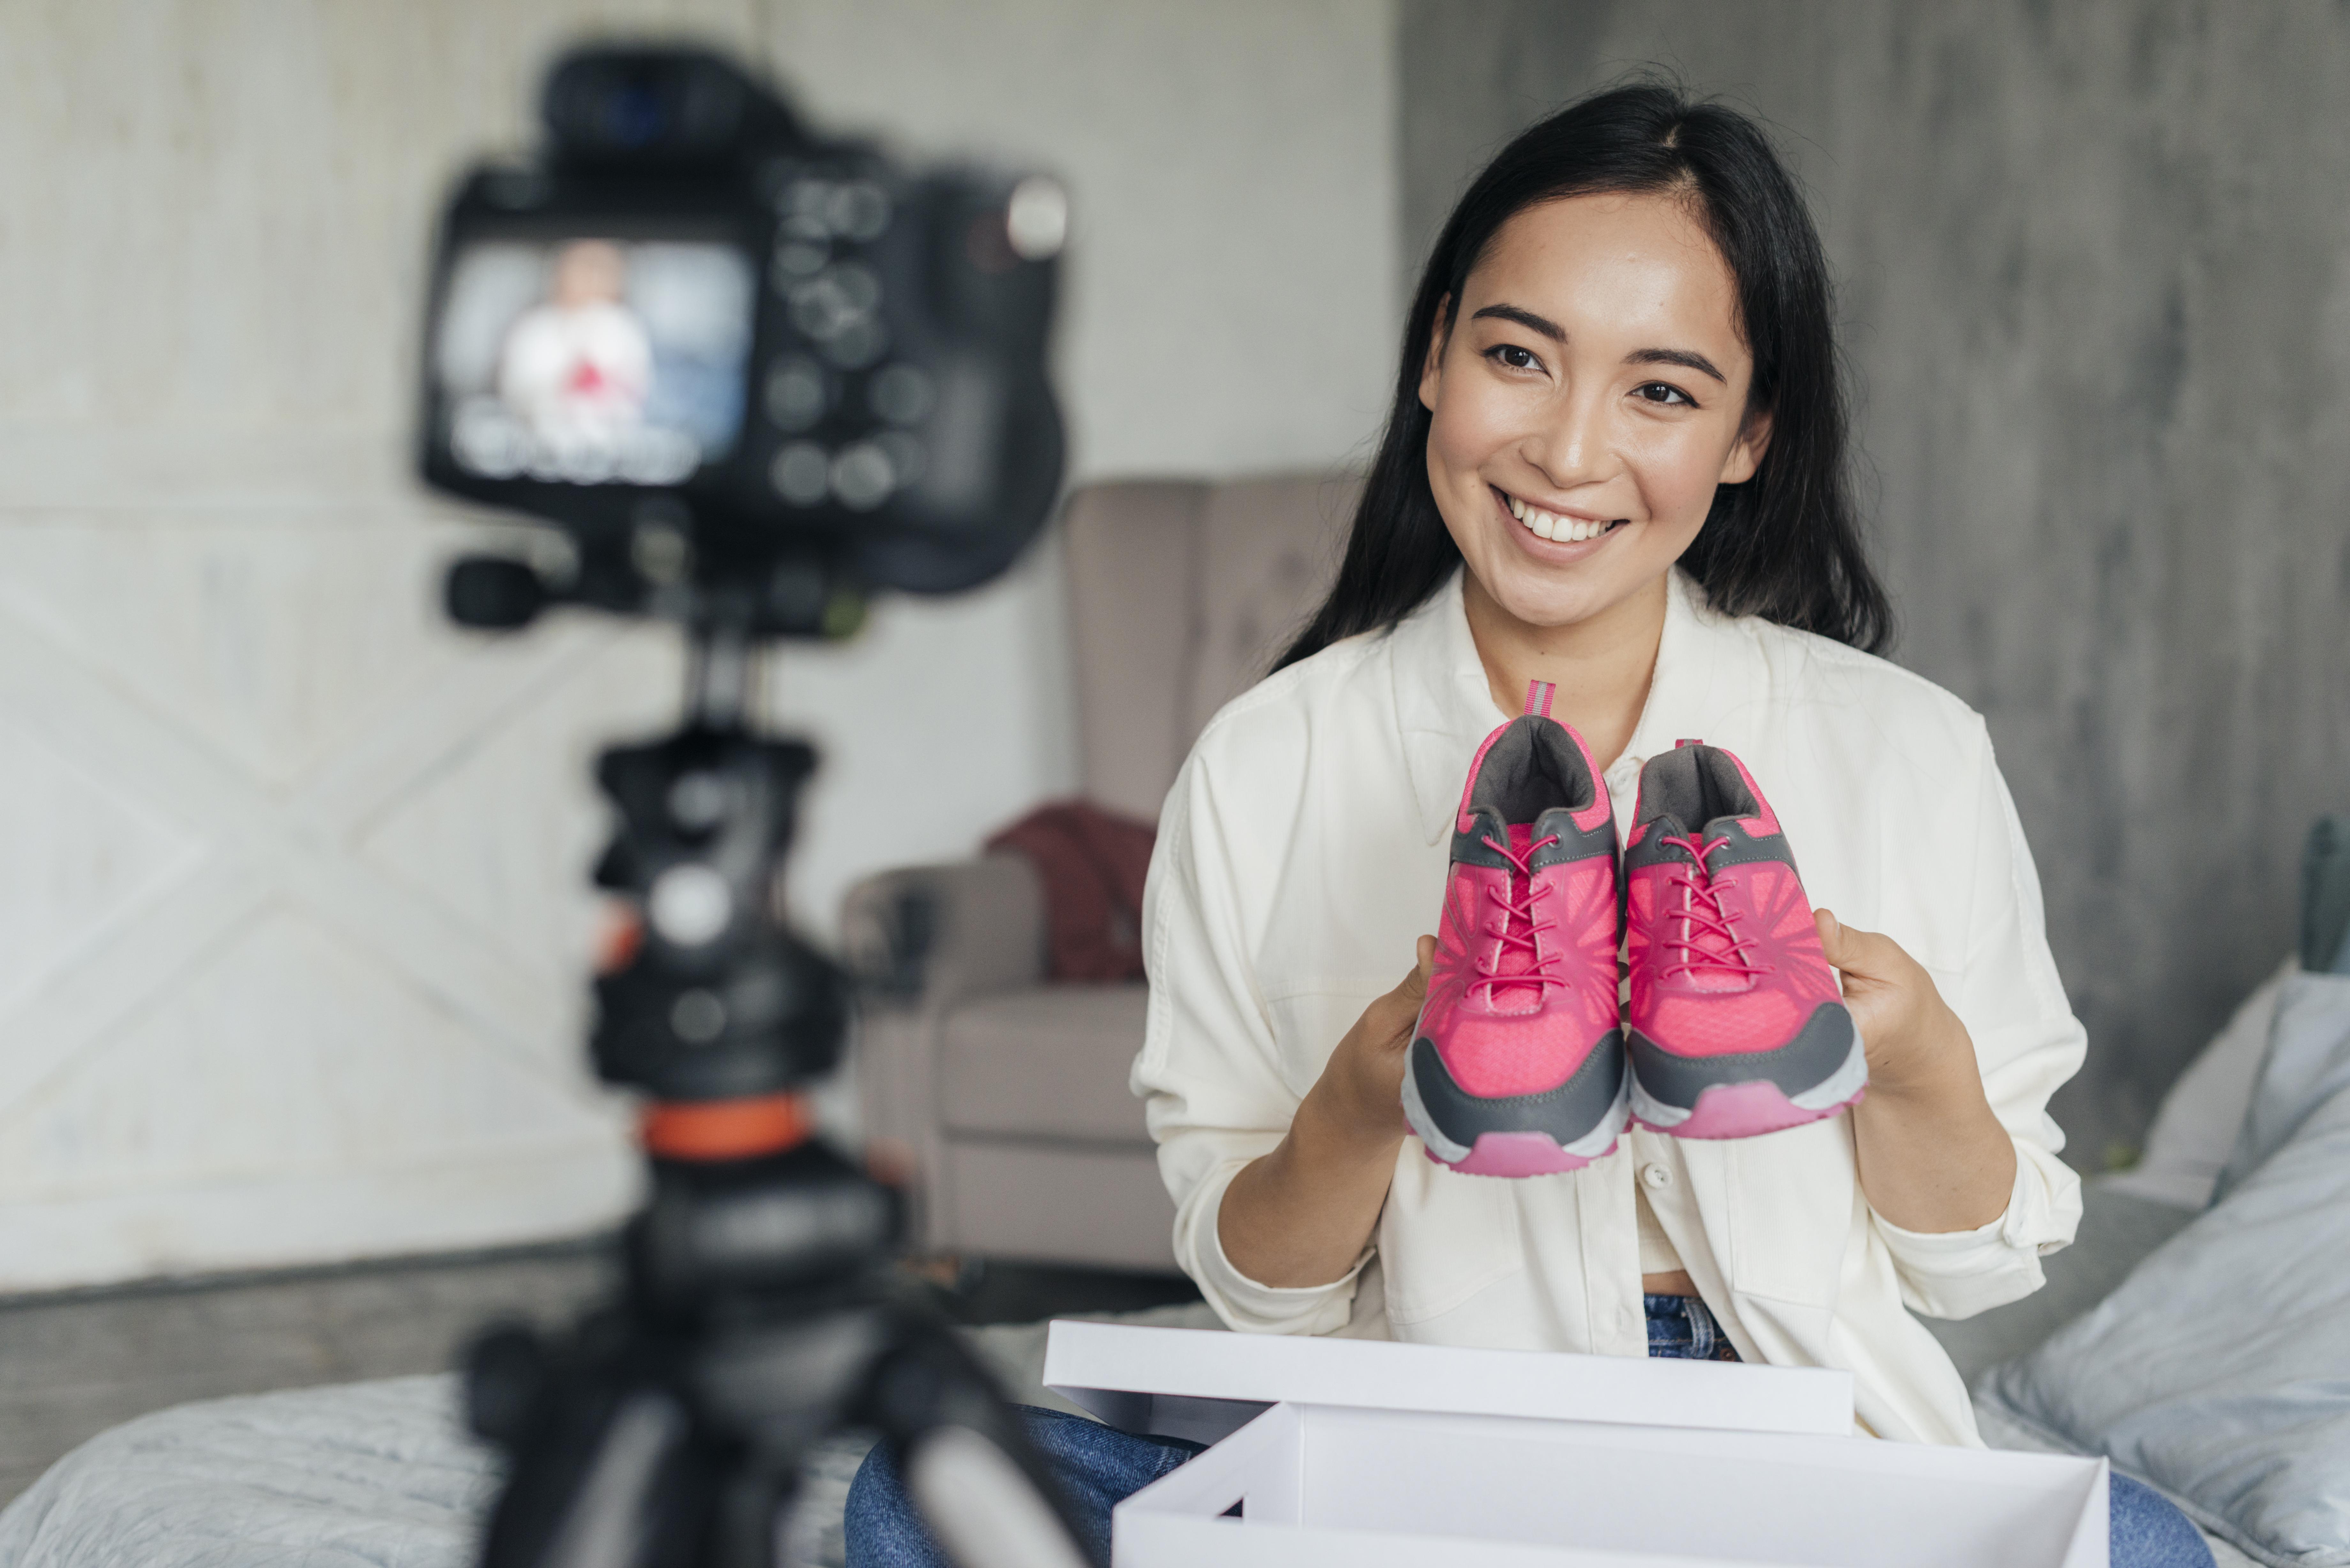 https://img.moneyduck.com/article_attachment/1654006950-woman-vlogging-with-her-sports-shoes.jpg